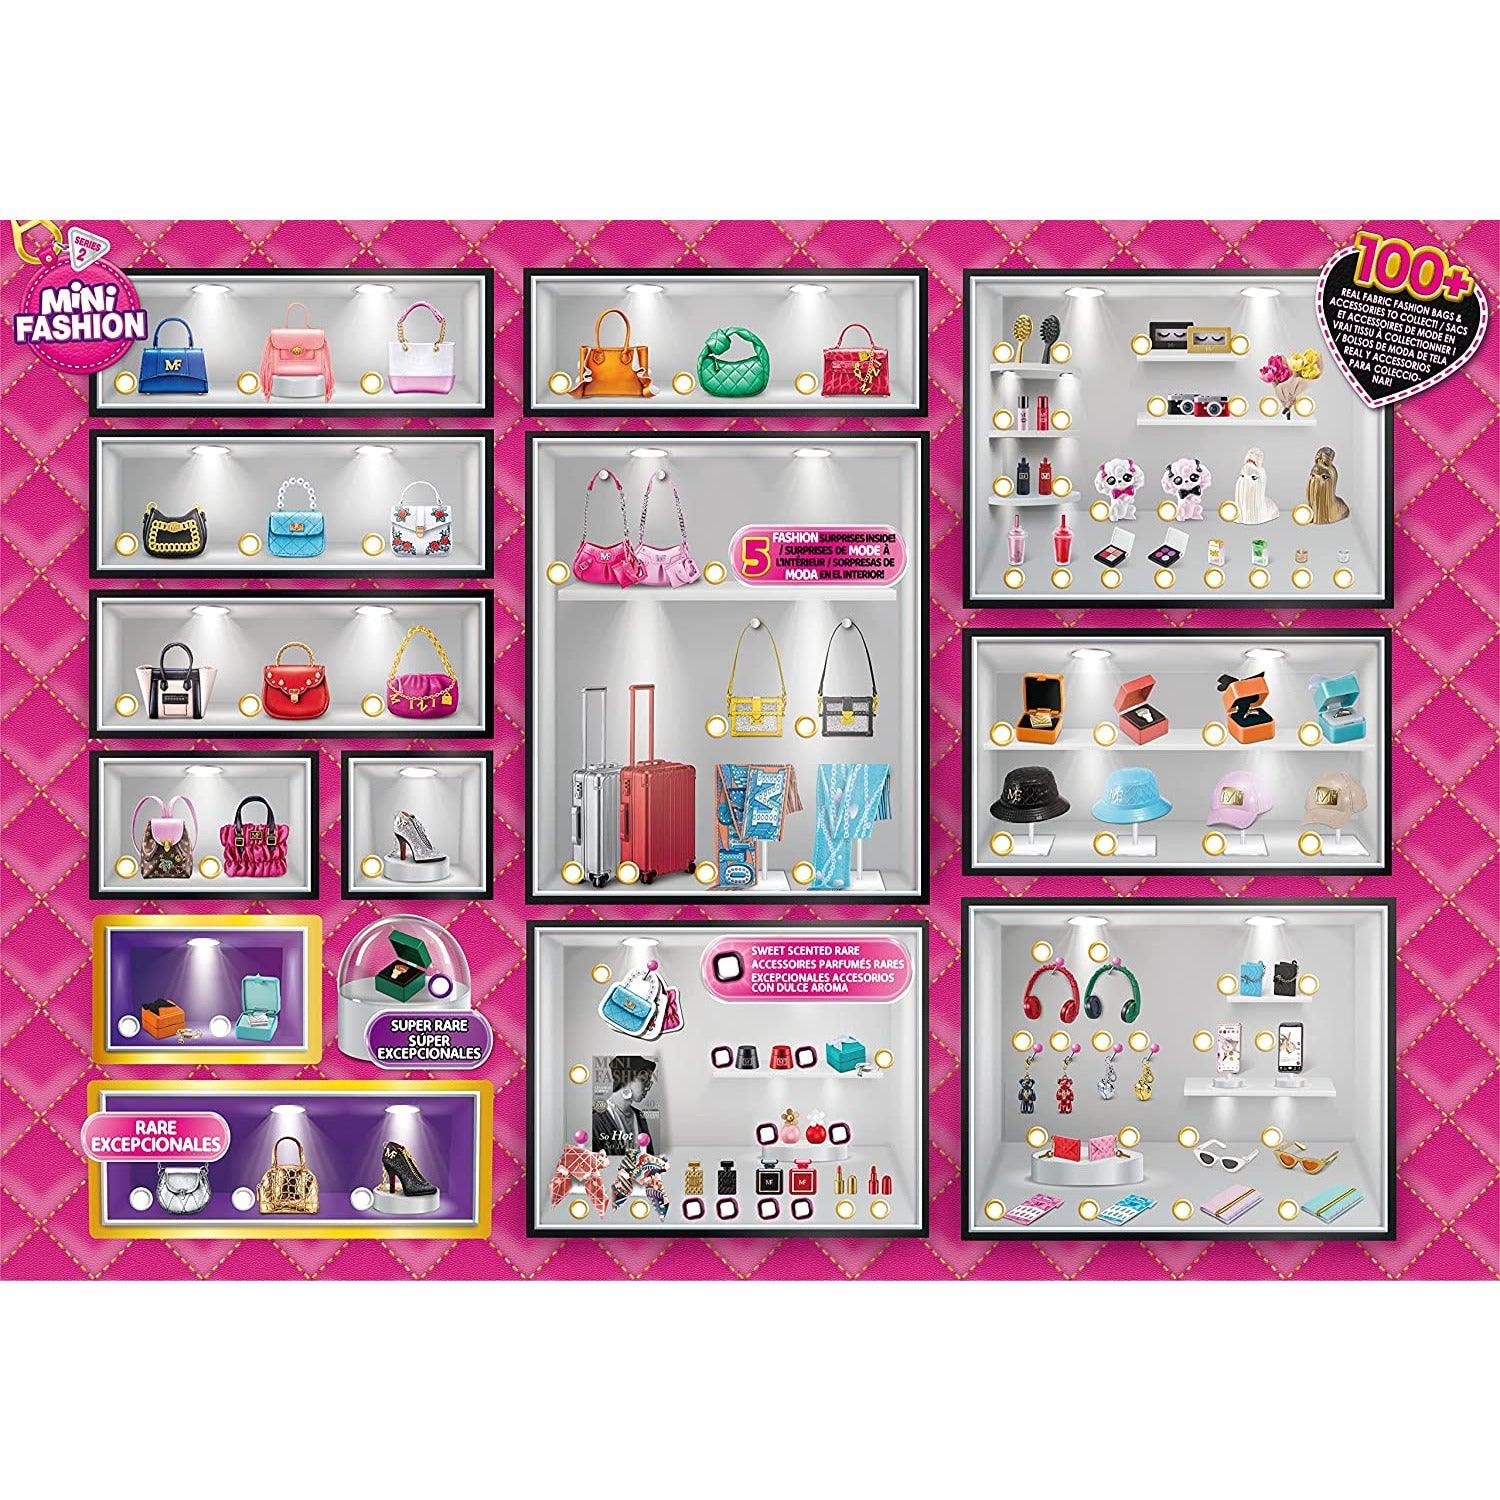 5 Surprise Mini Fashion Mystery Brand Collectibles by ZURU Series 2 - BumbleToys - 5-7 Years, 8-13 Years, Girls, Mini Toys, Miniature Dolls & Accessories, OXE, Pre-Order